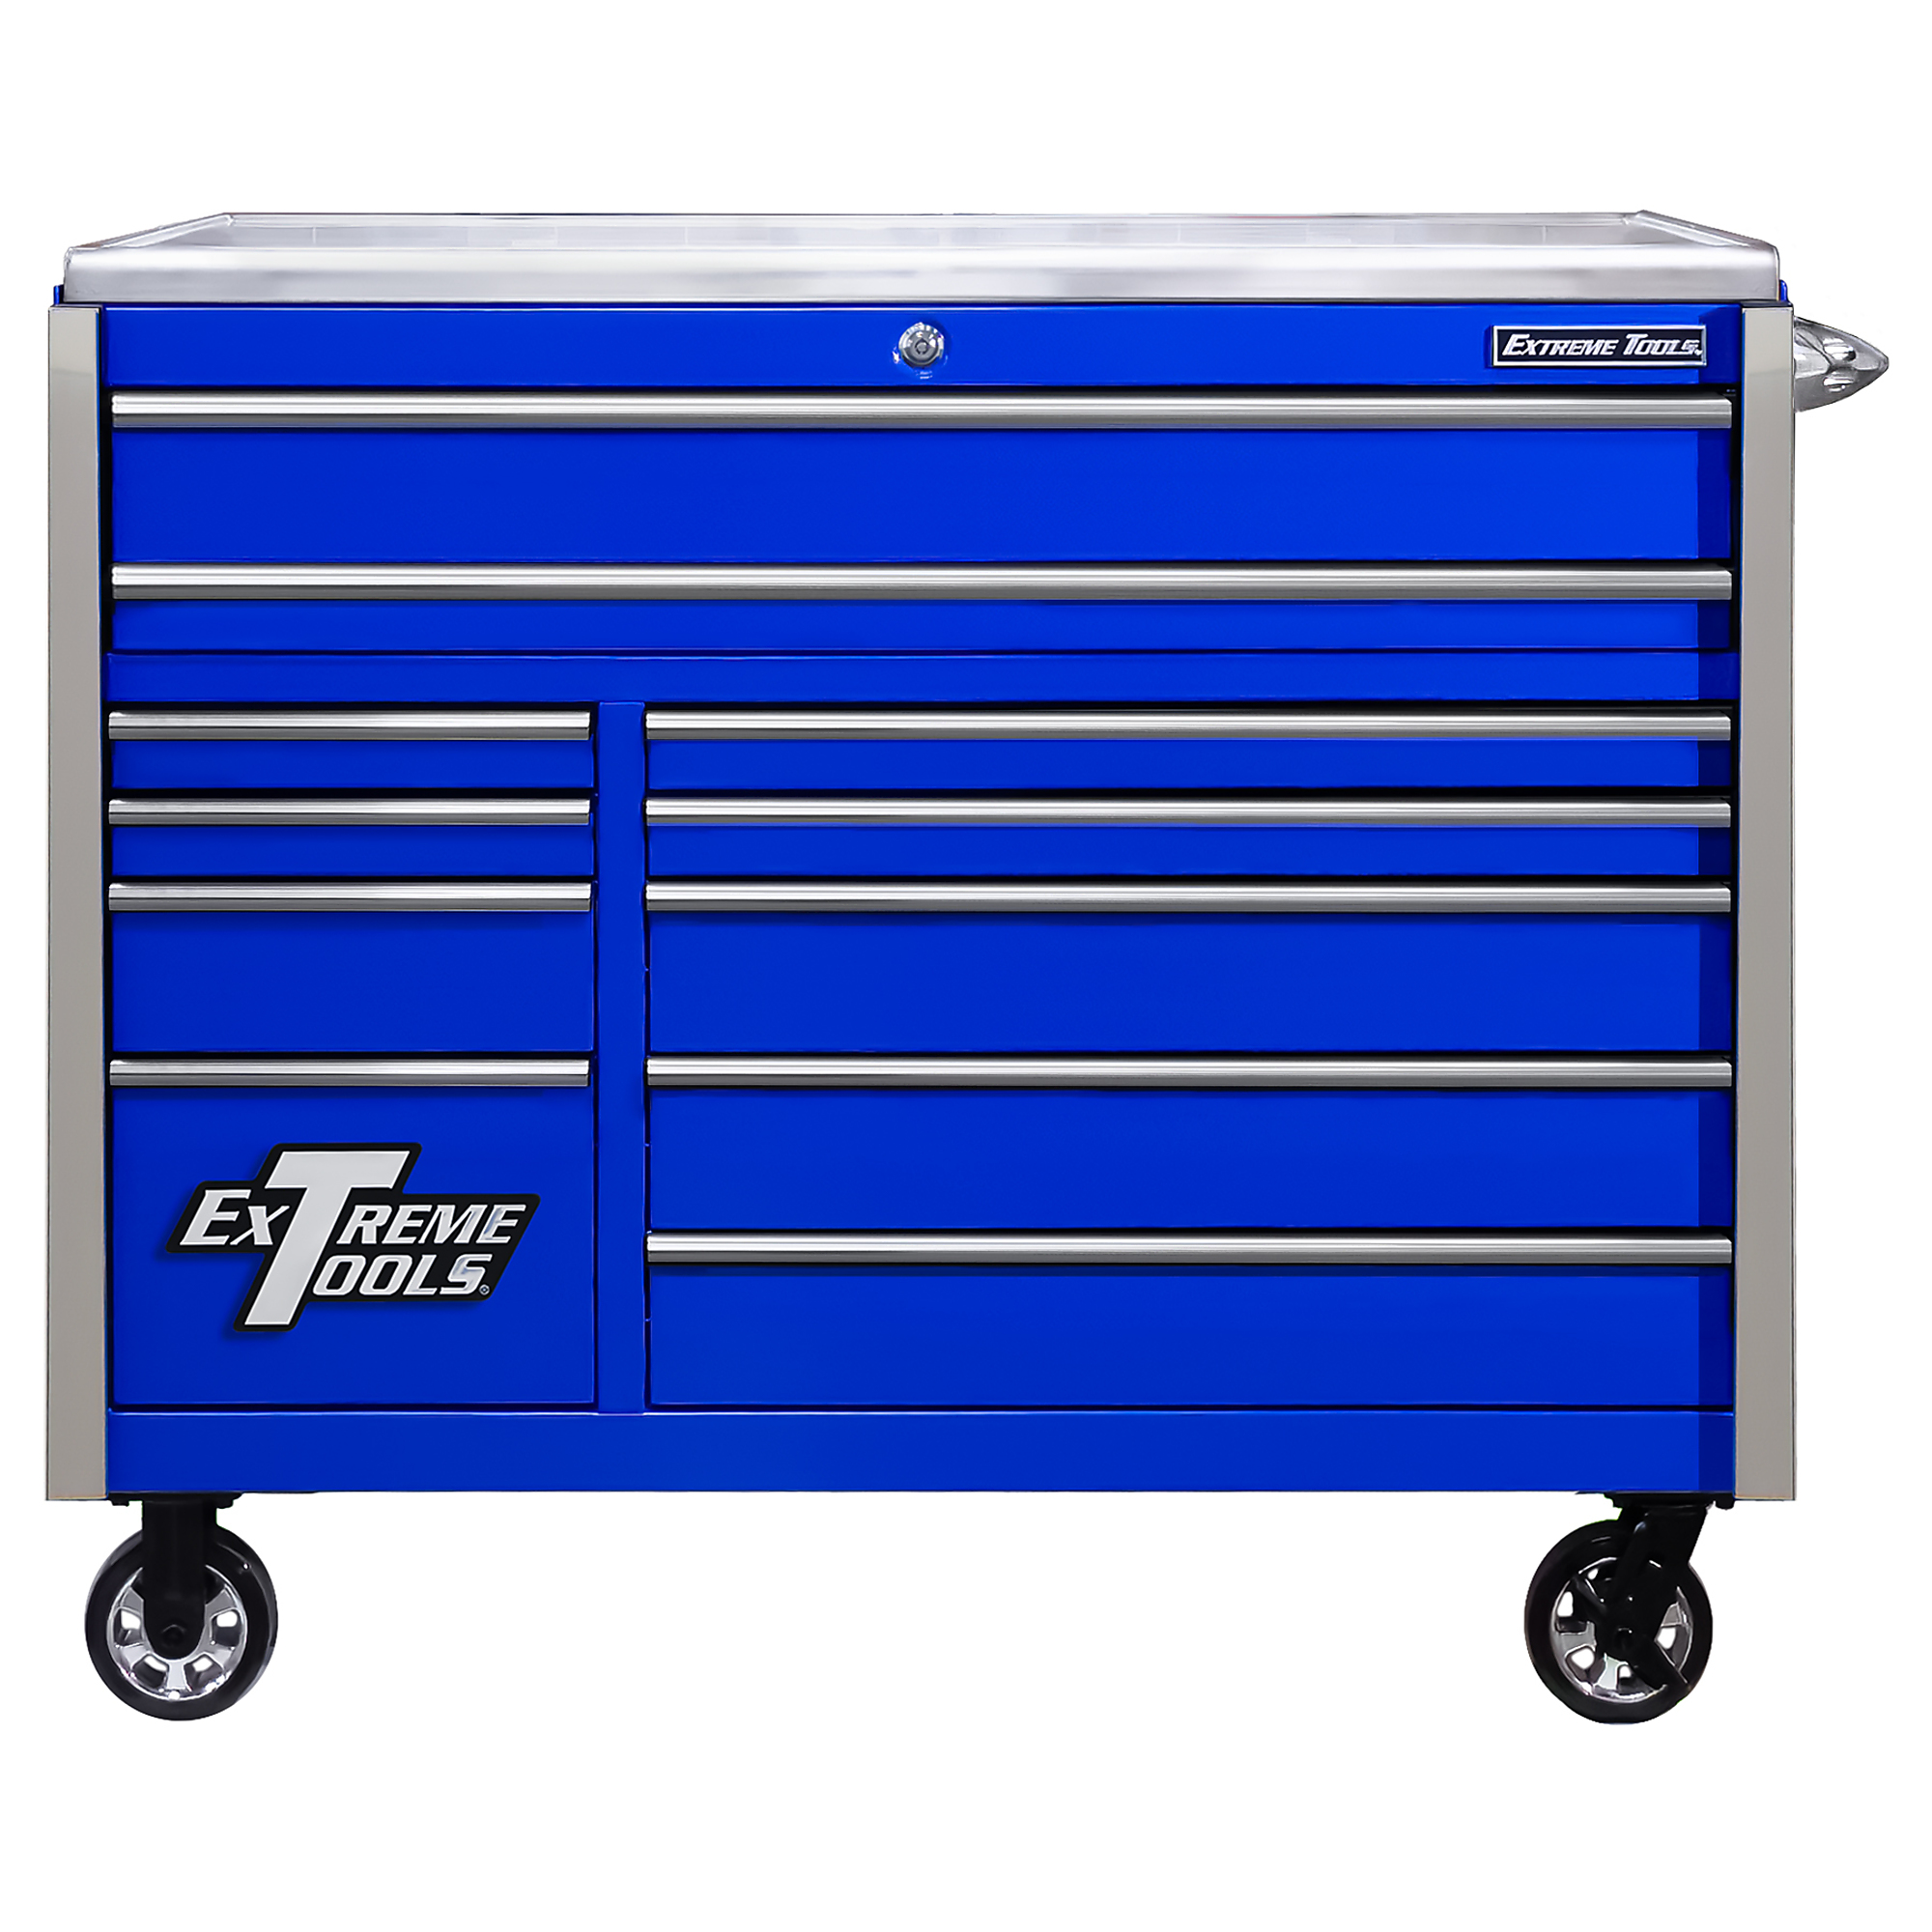 Extreme Tools, EXQ Pro Roller Cab, 55Inch x 30Inch, 11-Dr, BL/CR Trim, Width 55 in, Height 46.62 in, Color Blue, Model EX5511RCQBLCR